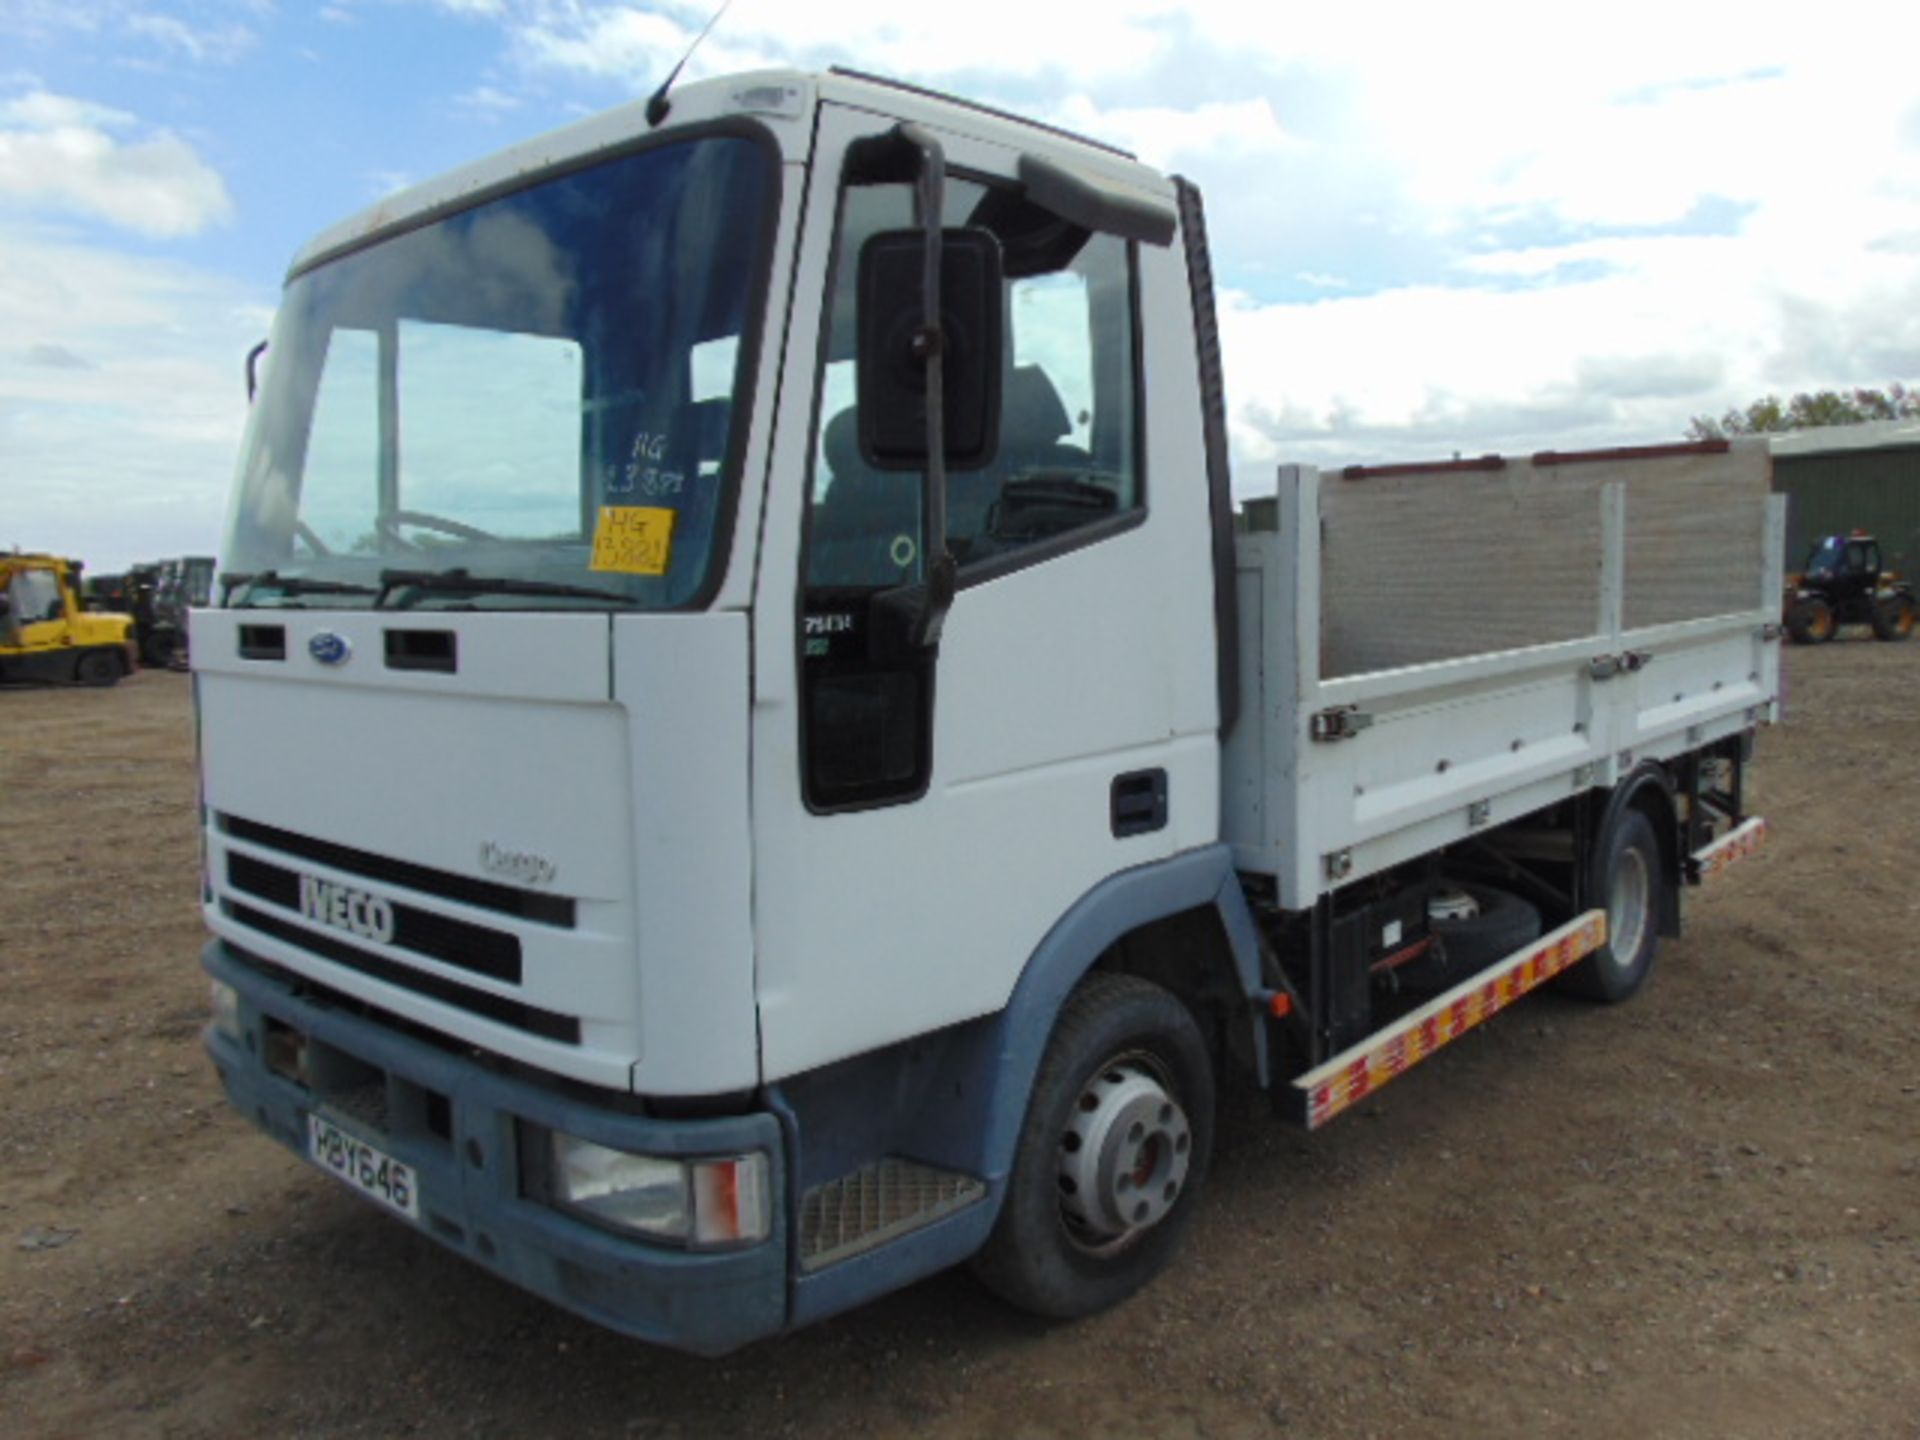 Ford Iveco Cargo 75E14 Complete with Rear Tail Lift - Image 3 of 21